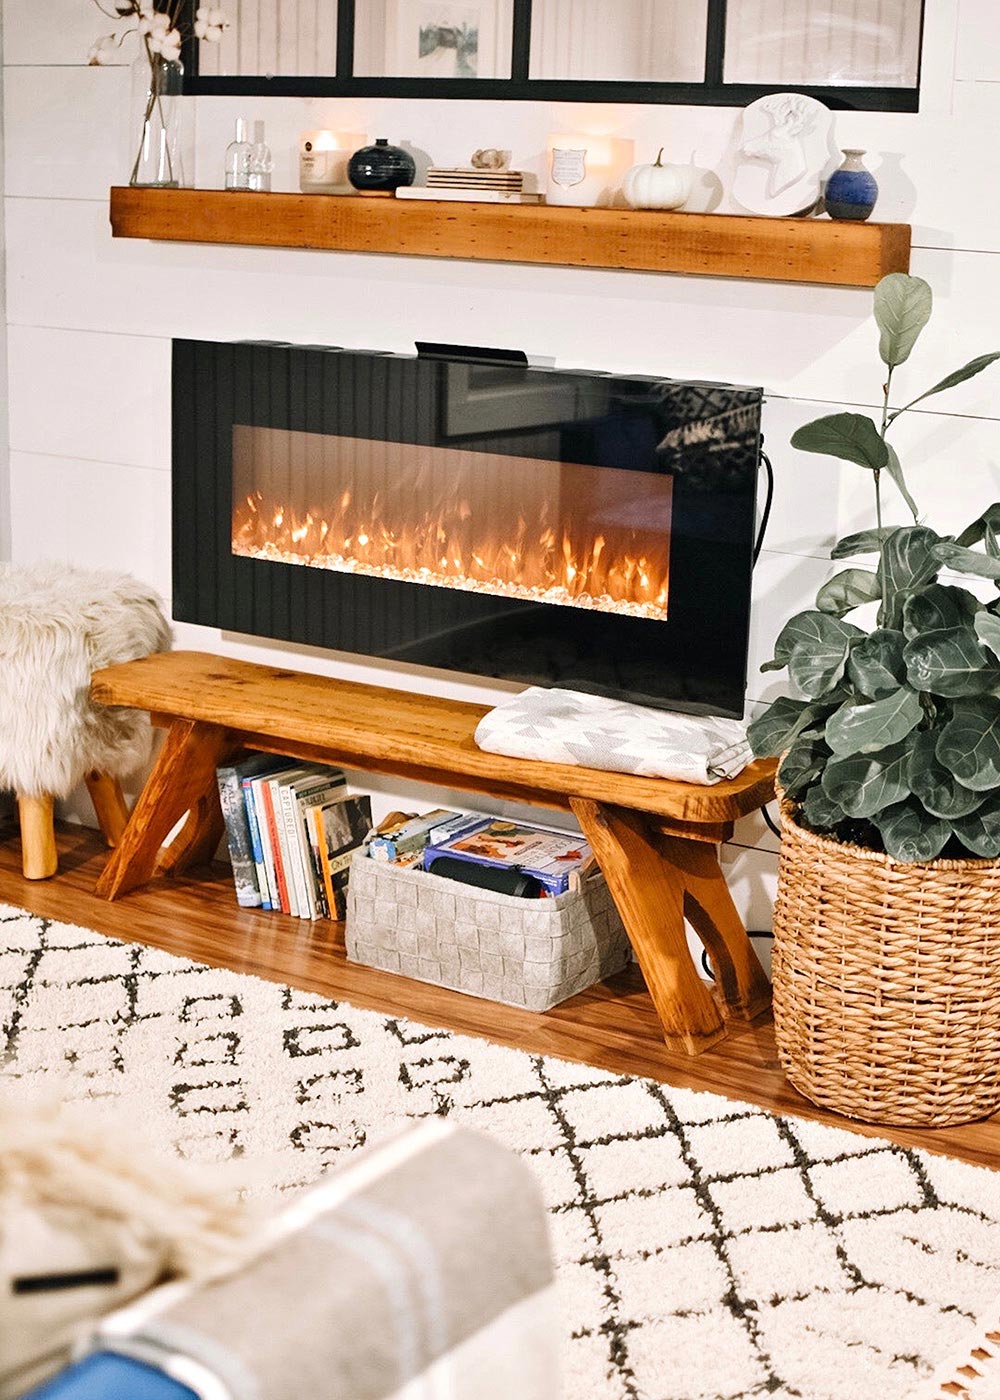 living room with fireplace and baskets